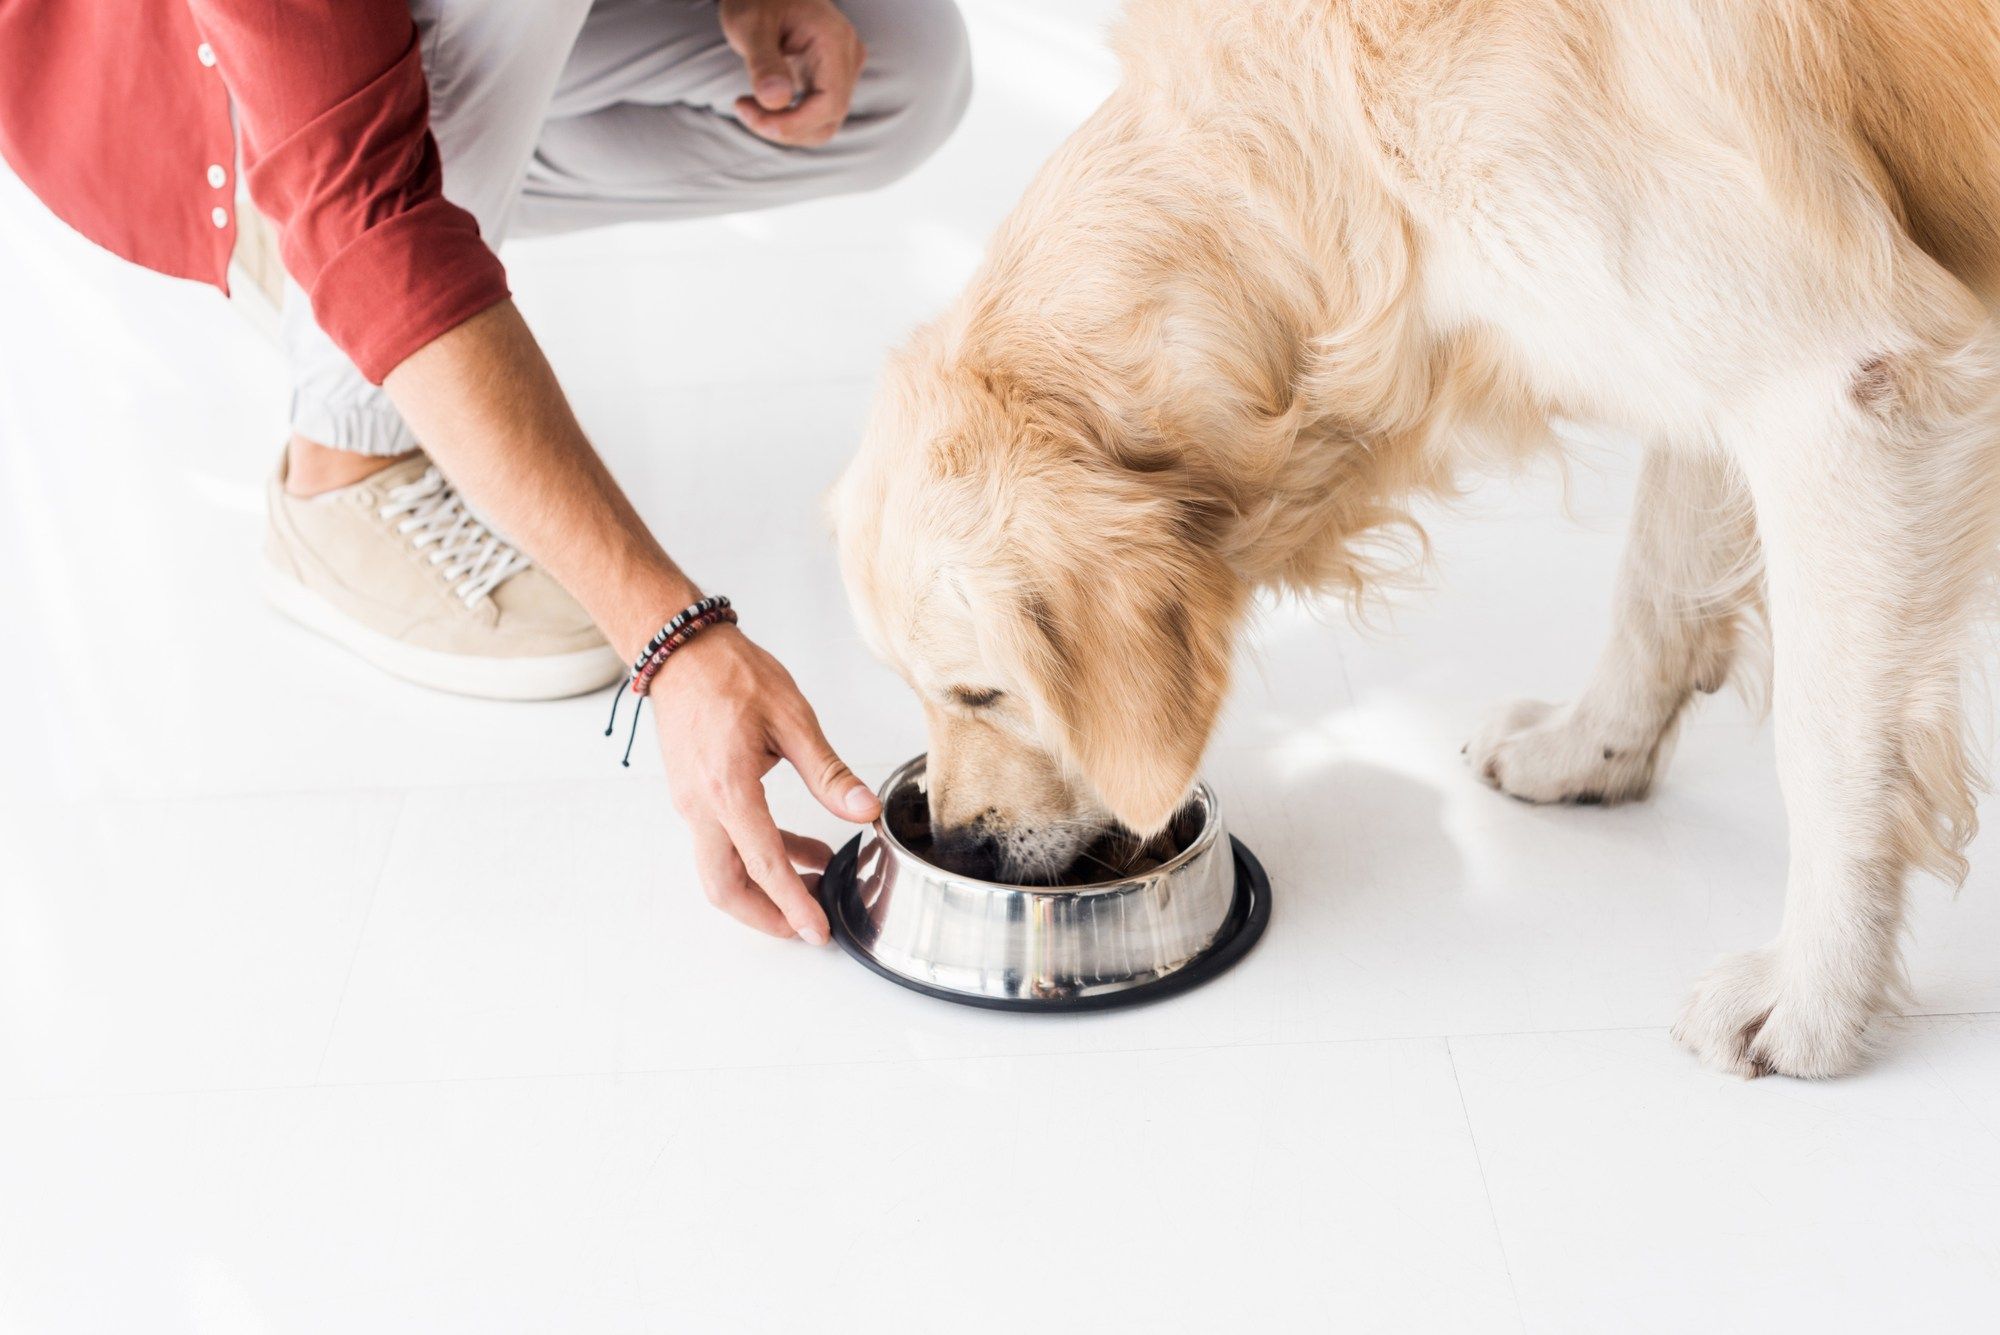 Performance Dog frozen pet food recalled over Salmonella and Listeria concerns.